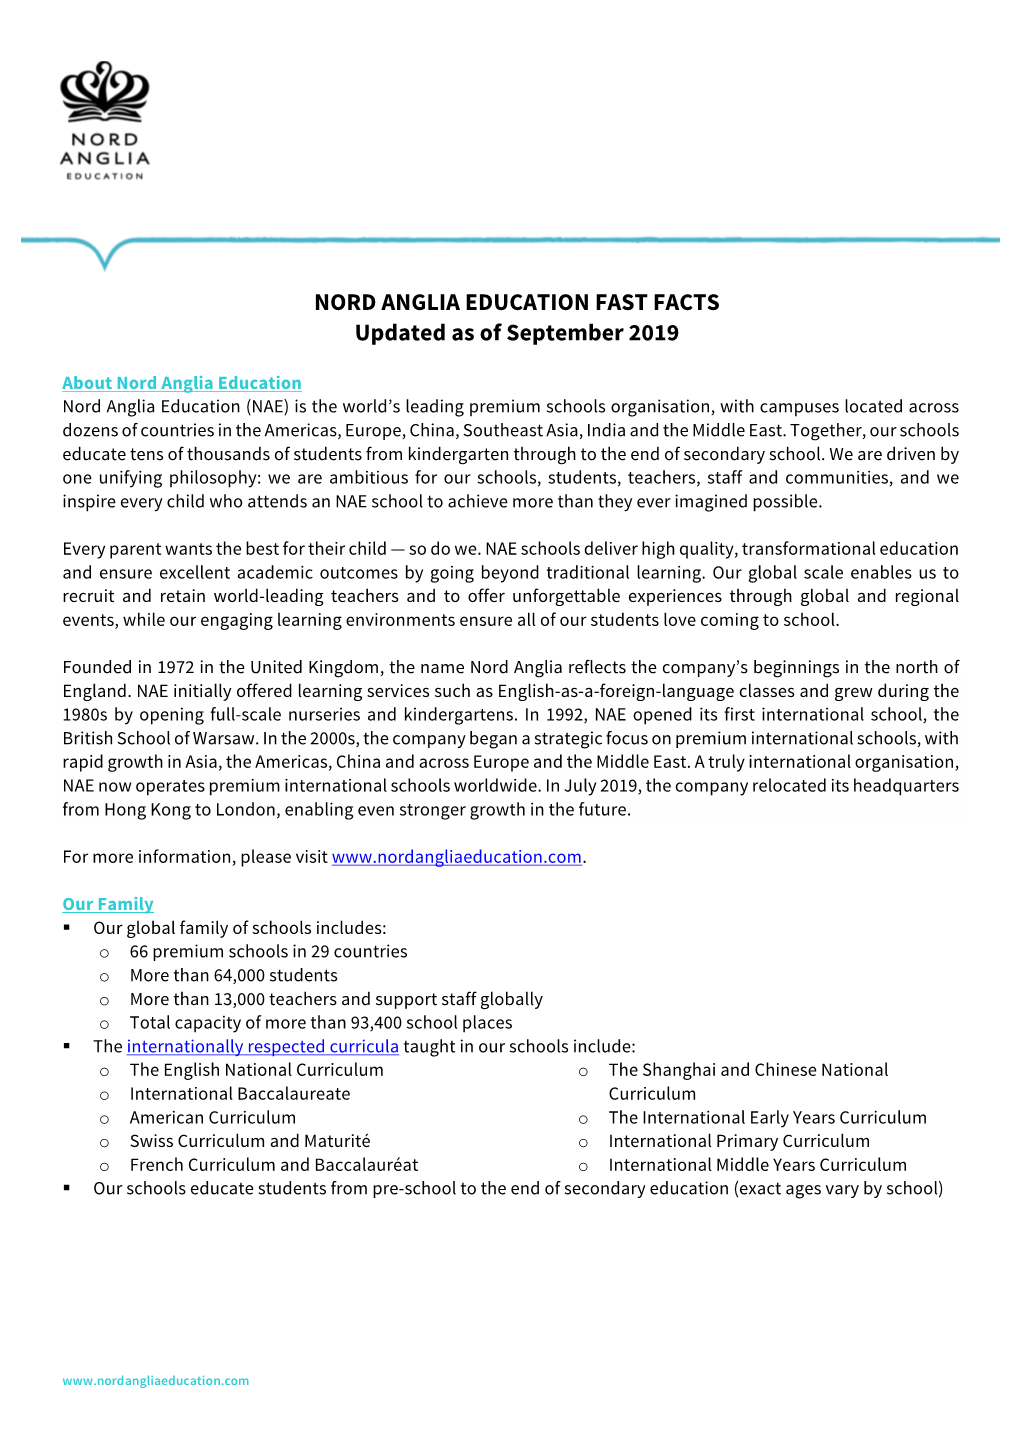 NORD ANGLIA EDUCATION FAST FACTS Updated As of September 2019